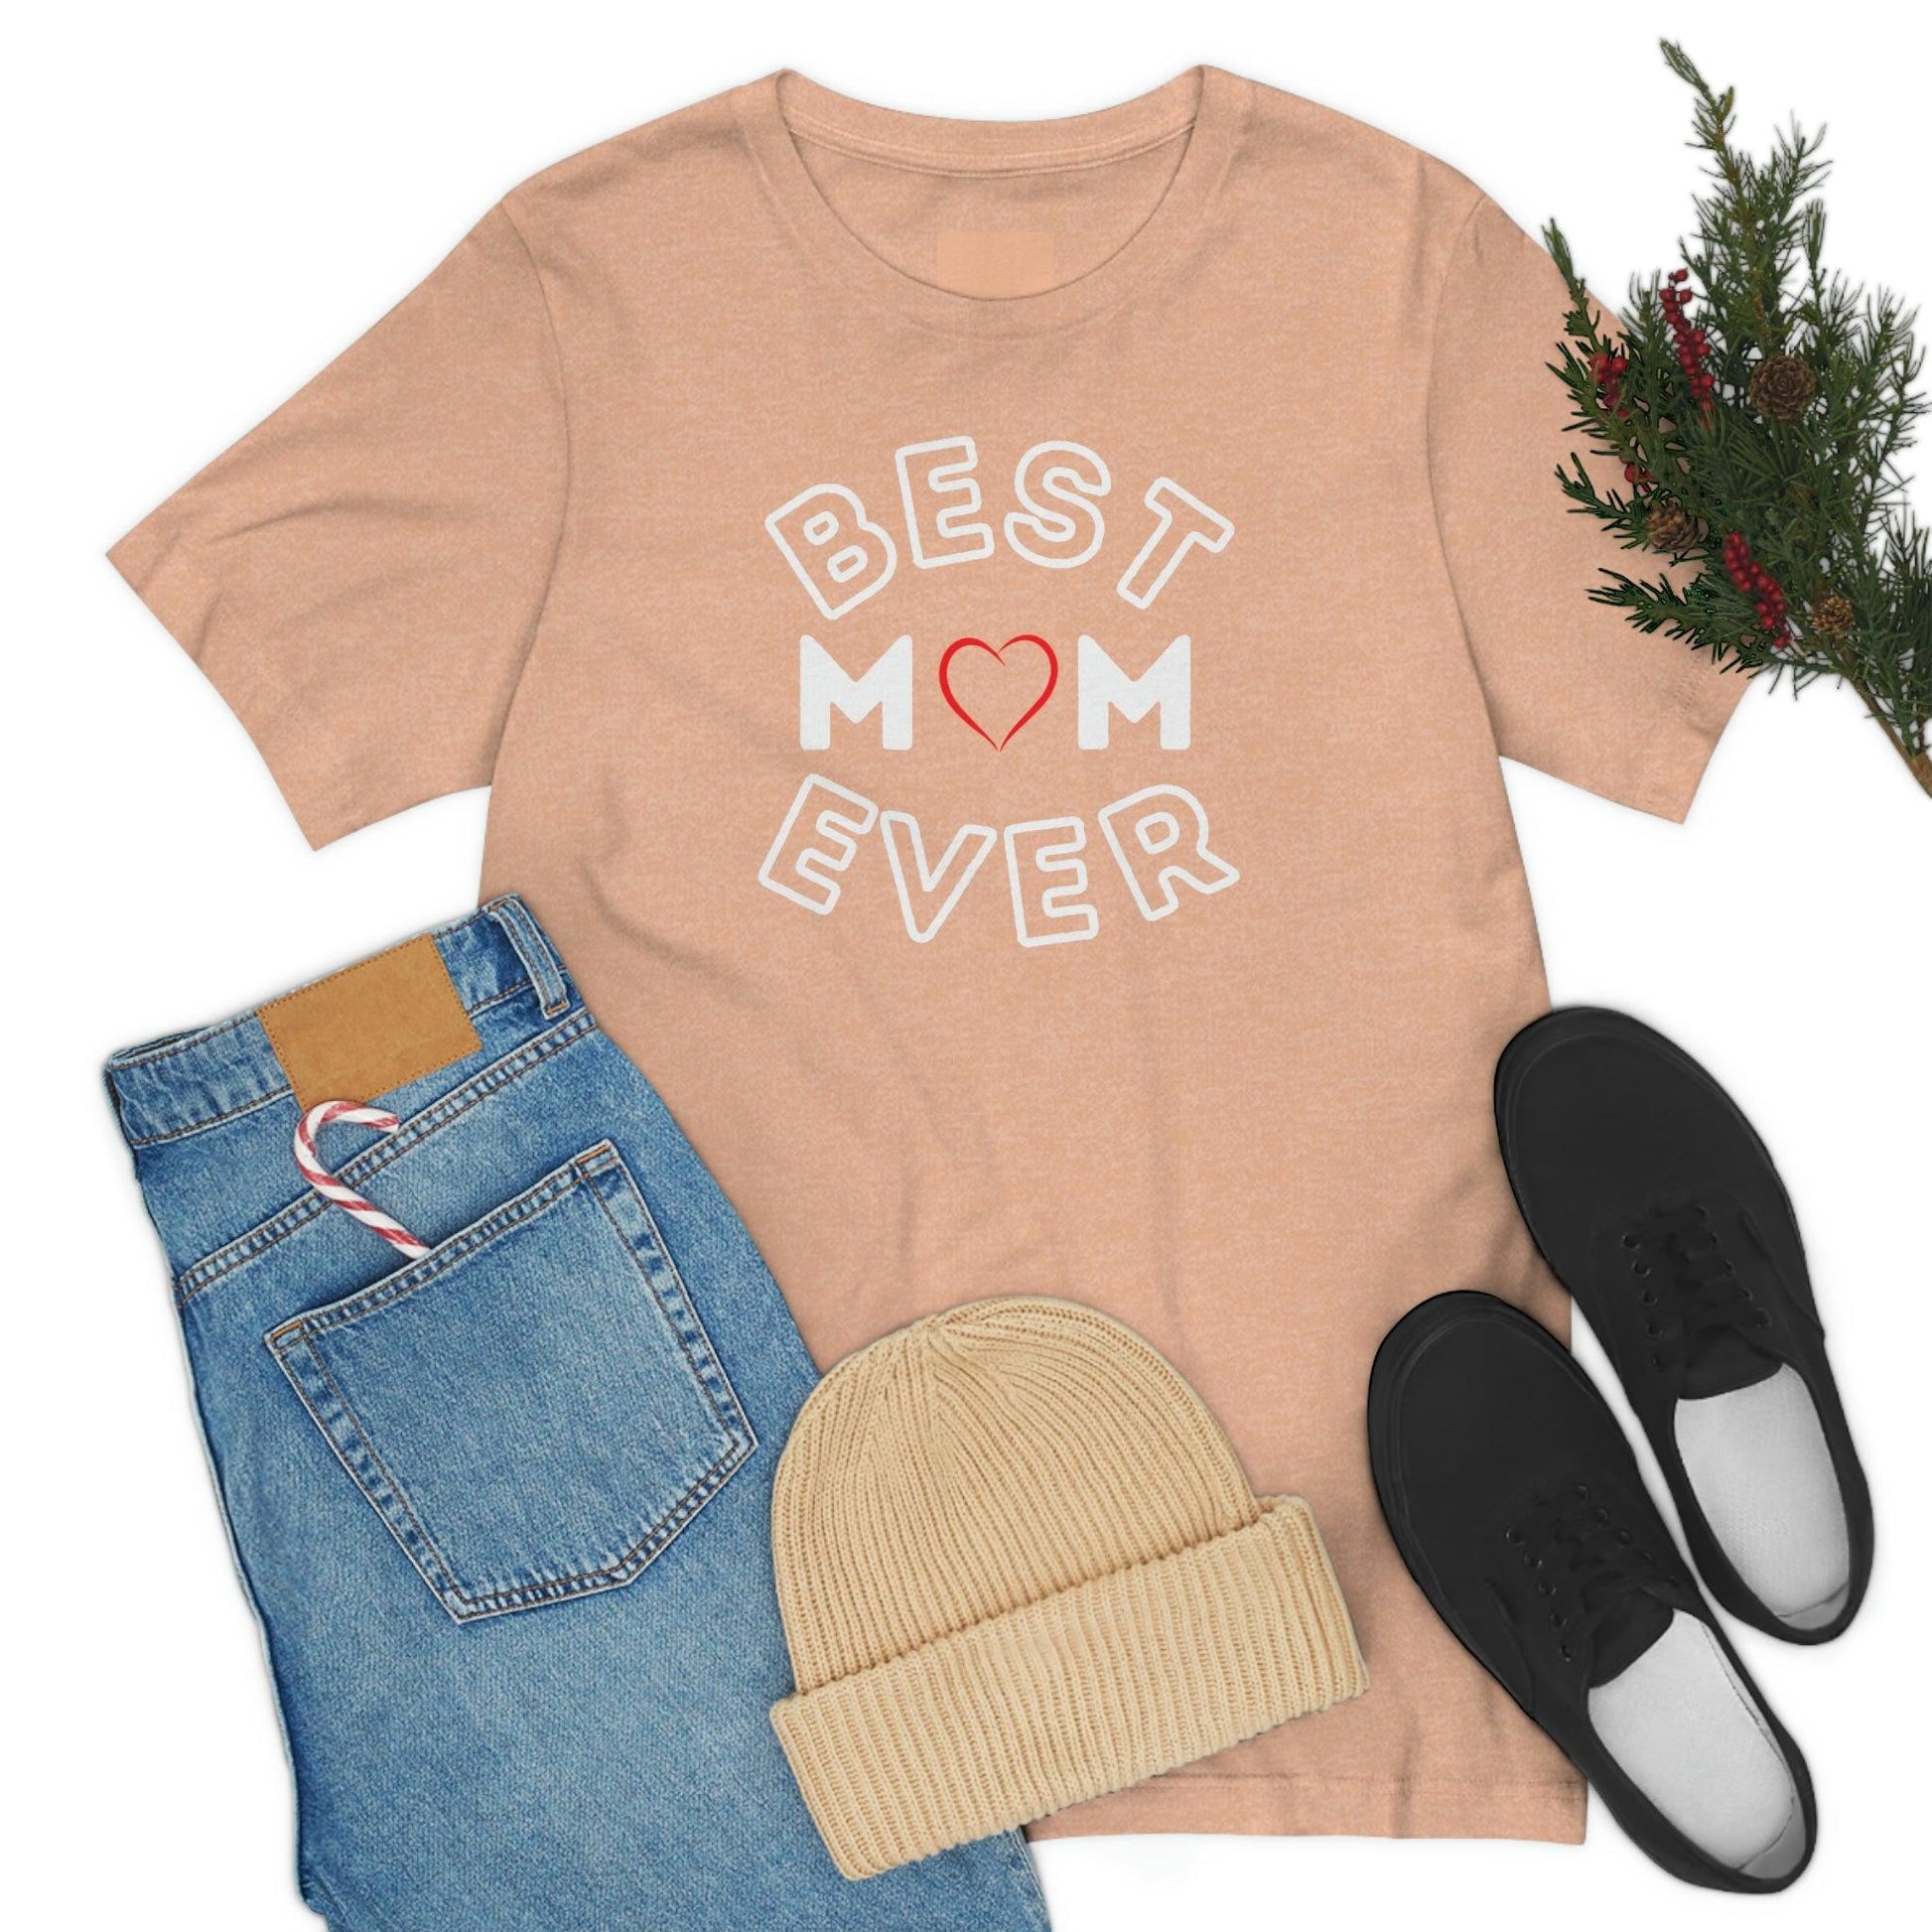 Best Mom Ever Shirt, Mothers day shirt, gift for mom, Mom birthday gift, Mothers day t shirts, Mothers shirts, Best mothers day gifta - Giftsmojo